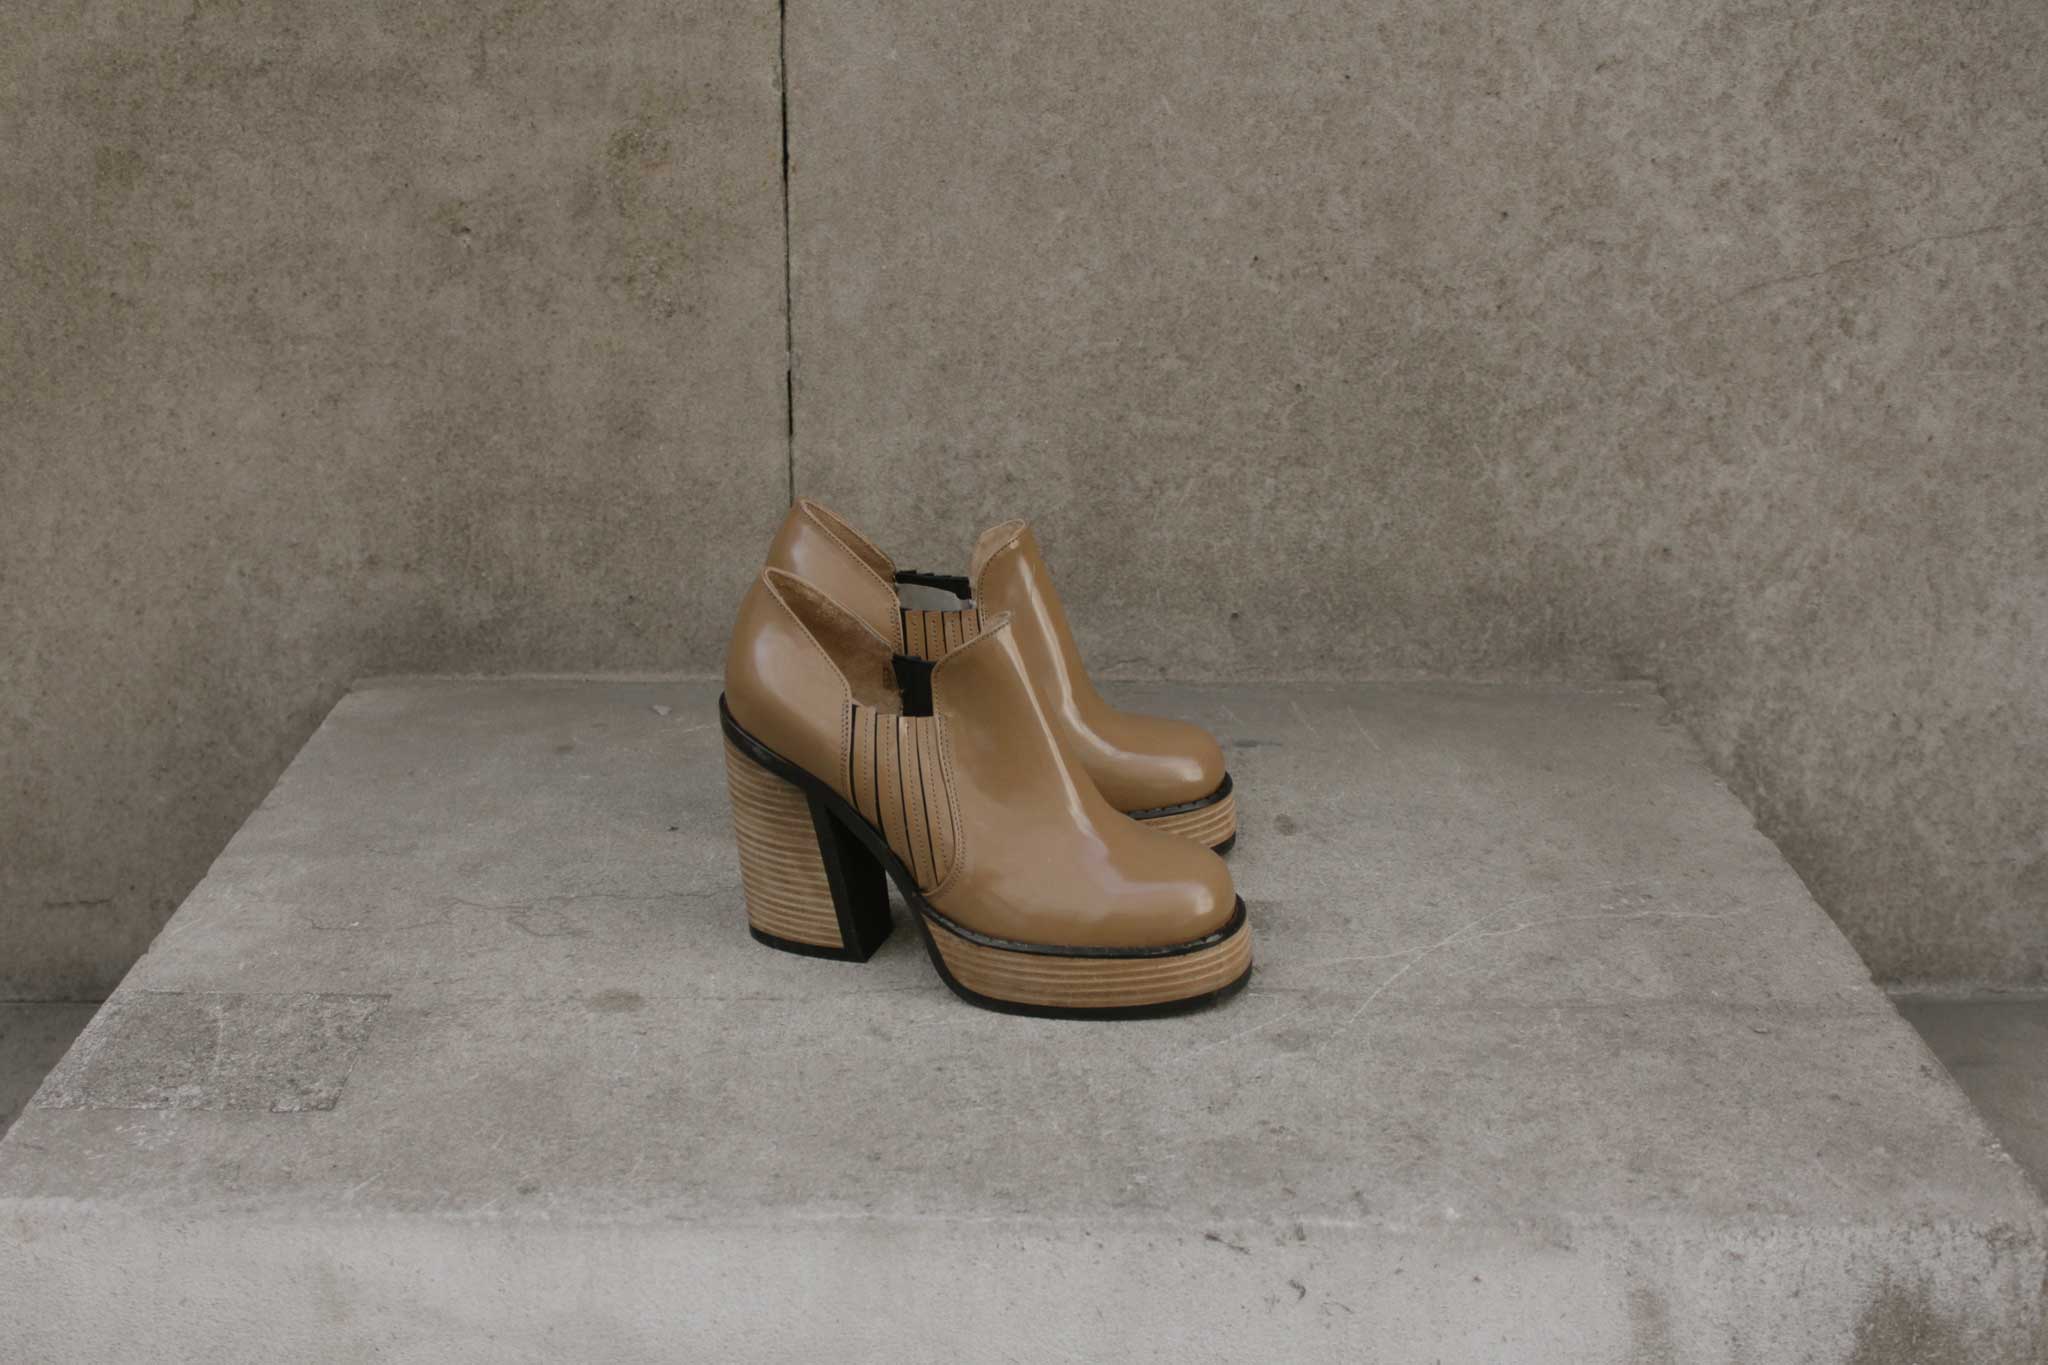 Fancy some footwear that's a bit 1970s, a bit Scandi and perfect for the coming season – or rather the microseason, when the sun comes out but it isn't sandal weather just yet? Well, Purified's new shoes, available at Selfridges, are diverting and directional. And, above all, comfy.